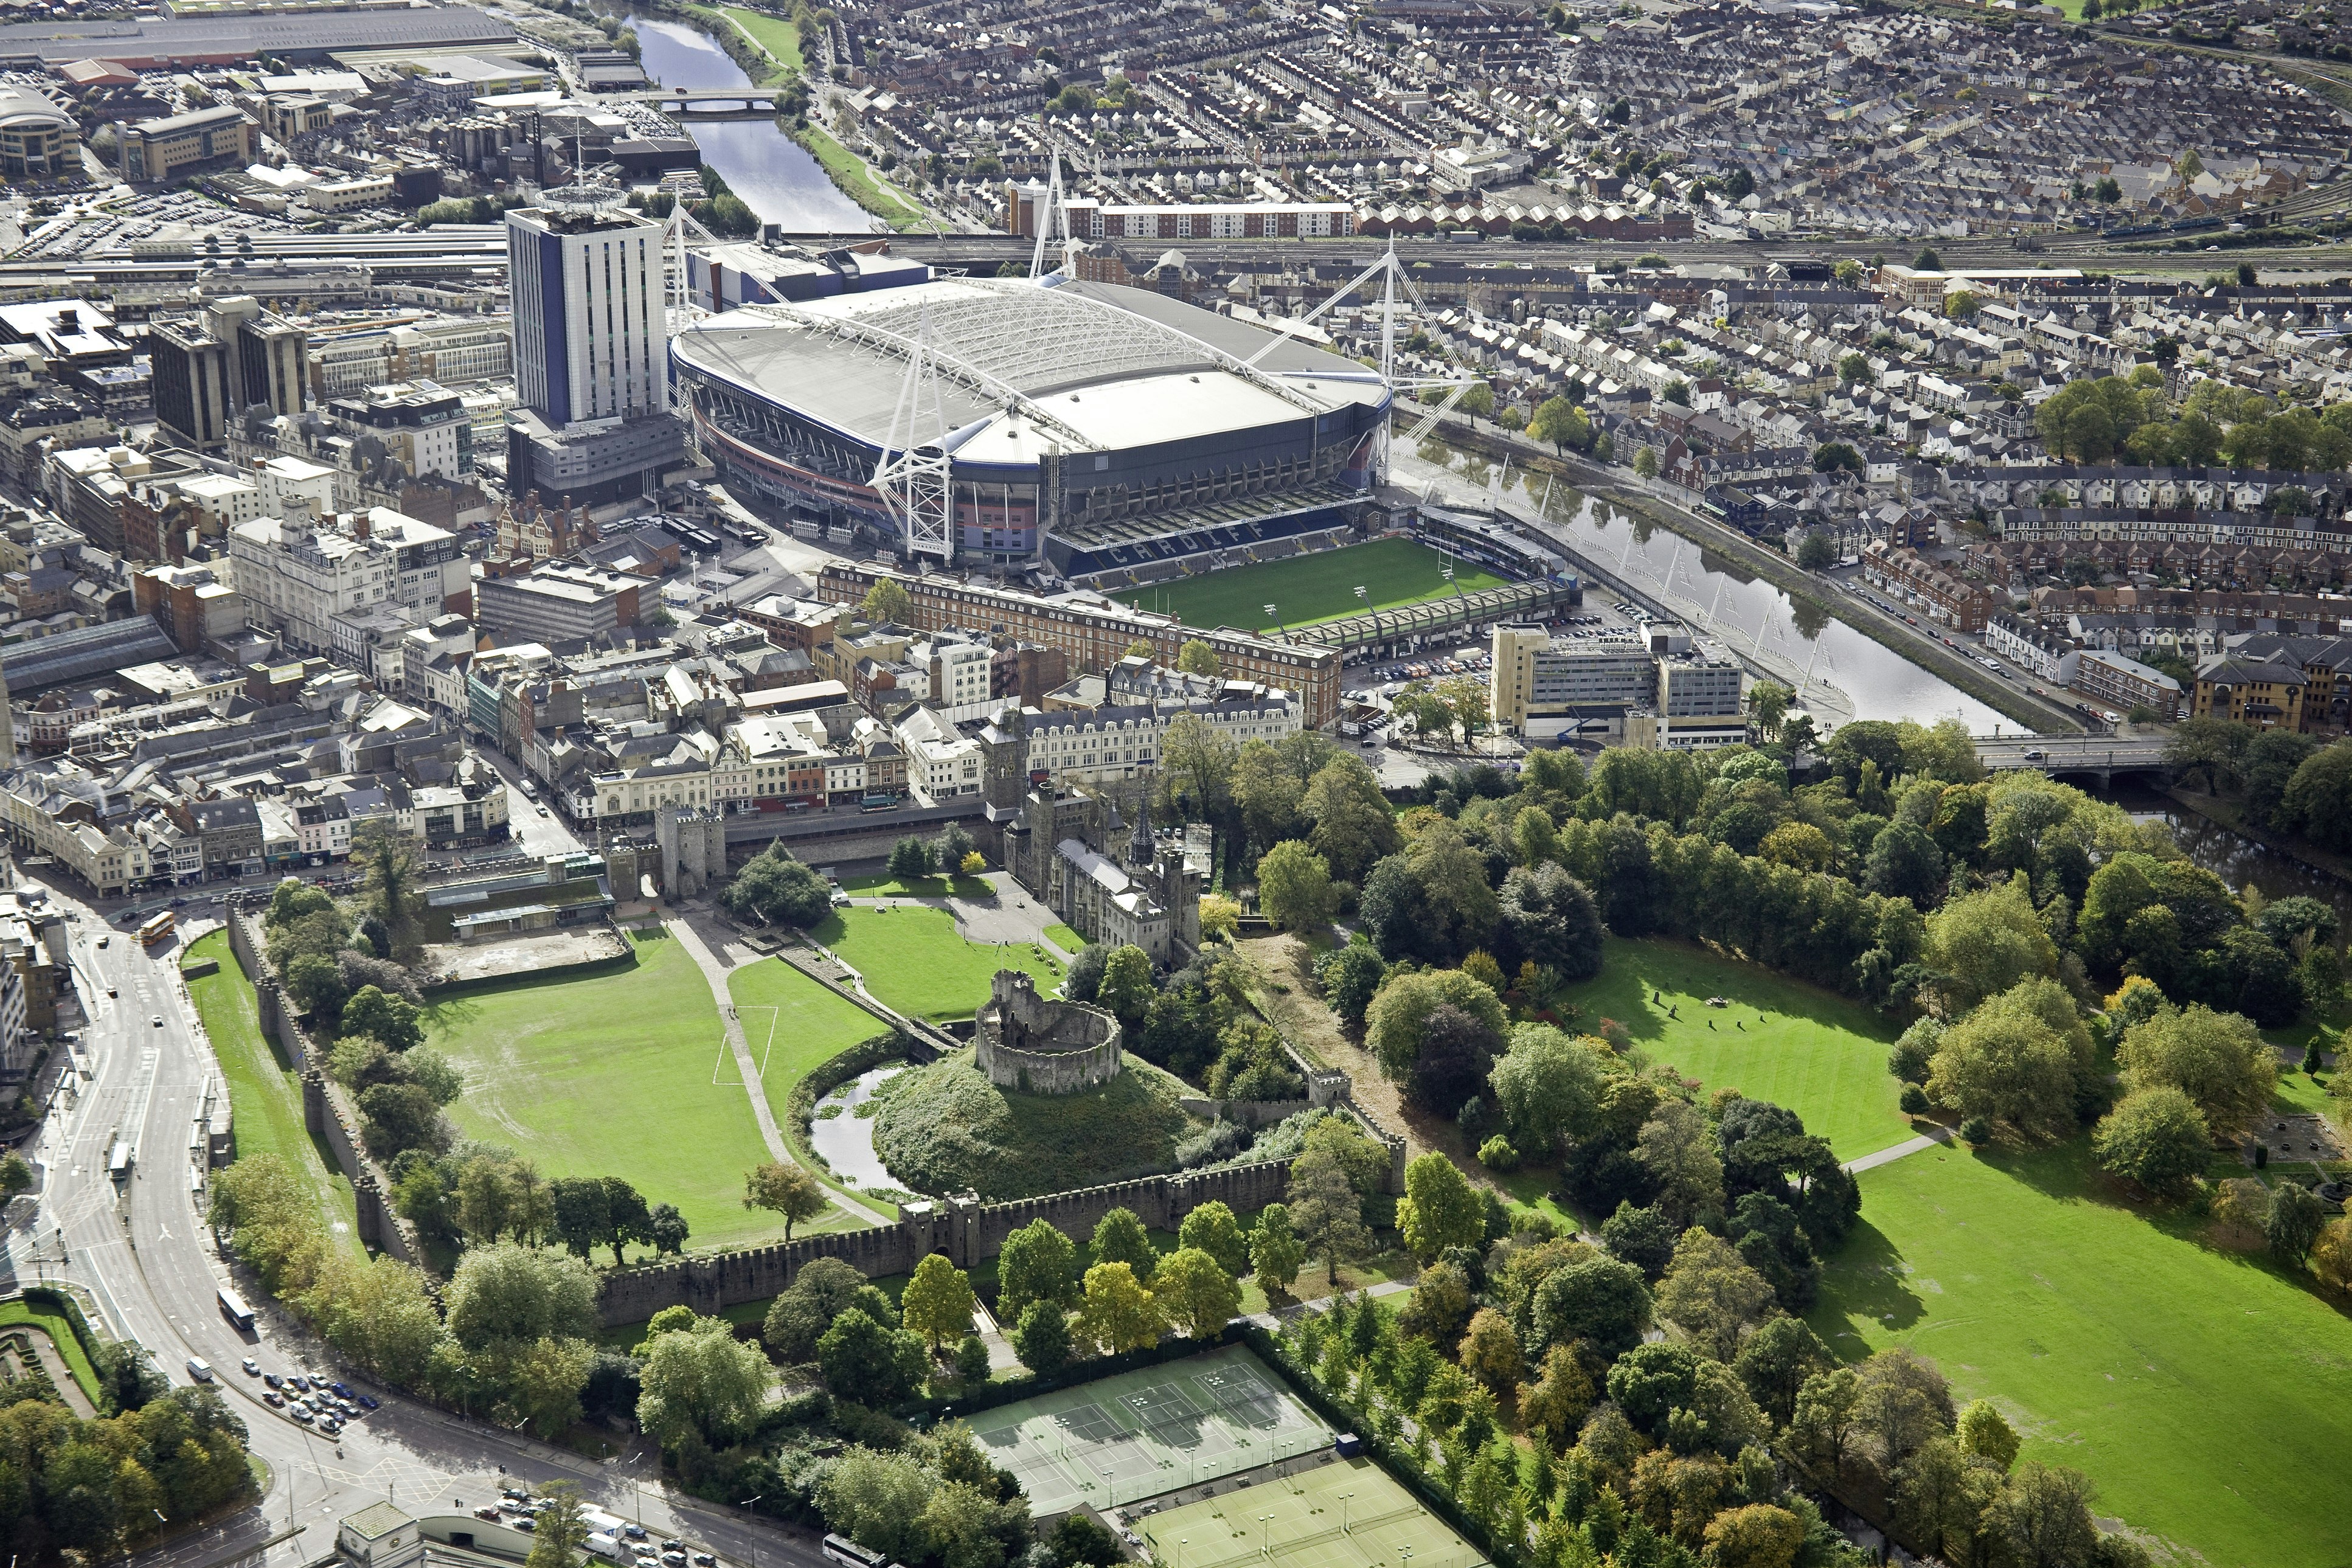 An aerial view of Cardiff city centre which shows Cardiff Castle, Bute Park and the Principality Stadium